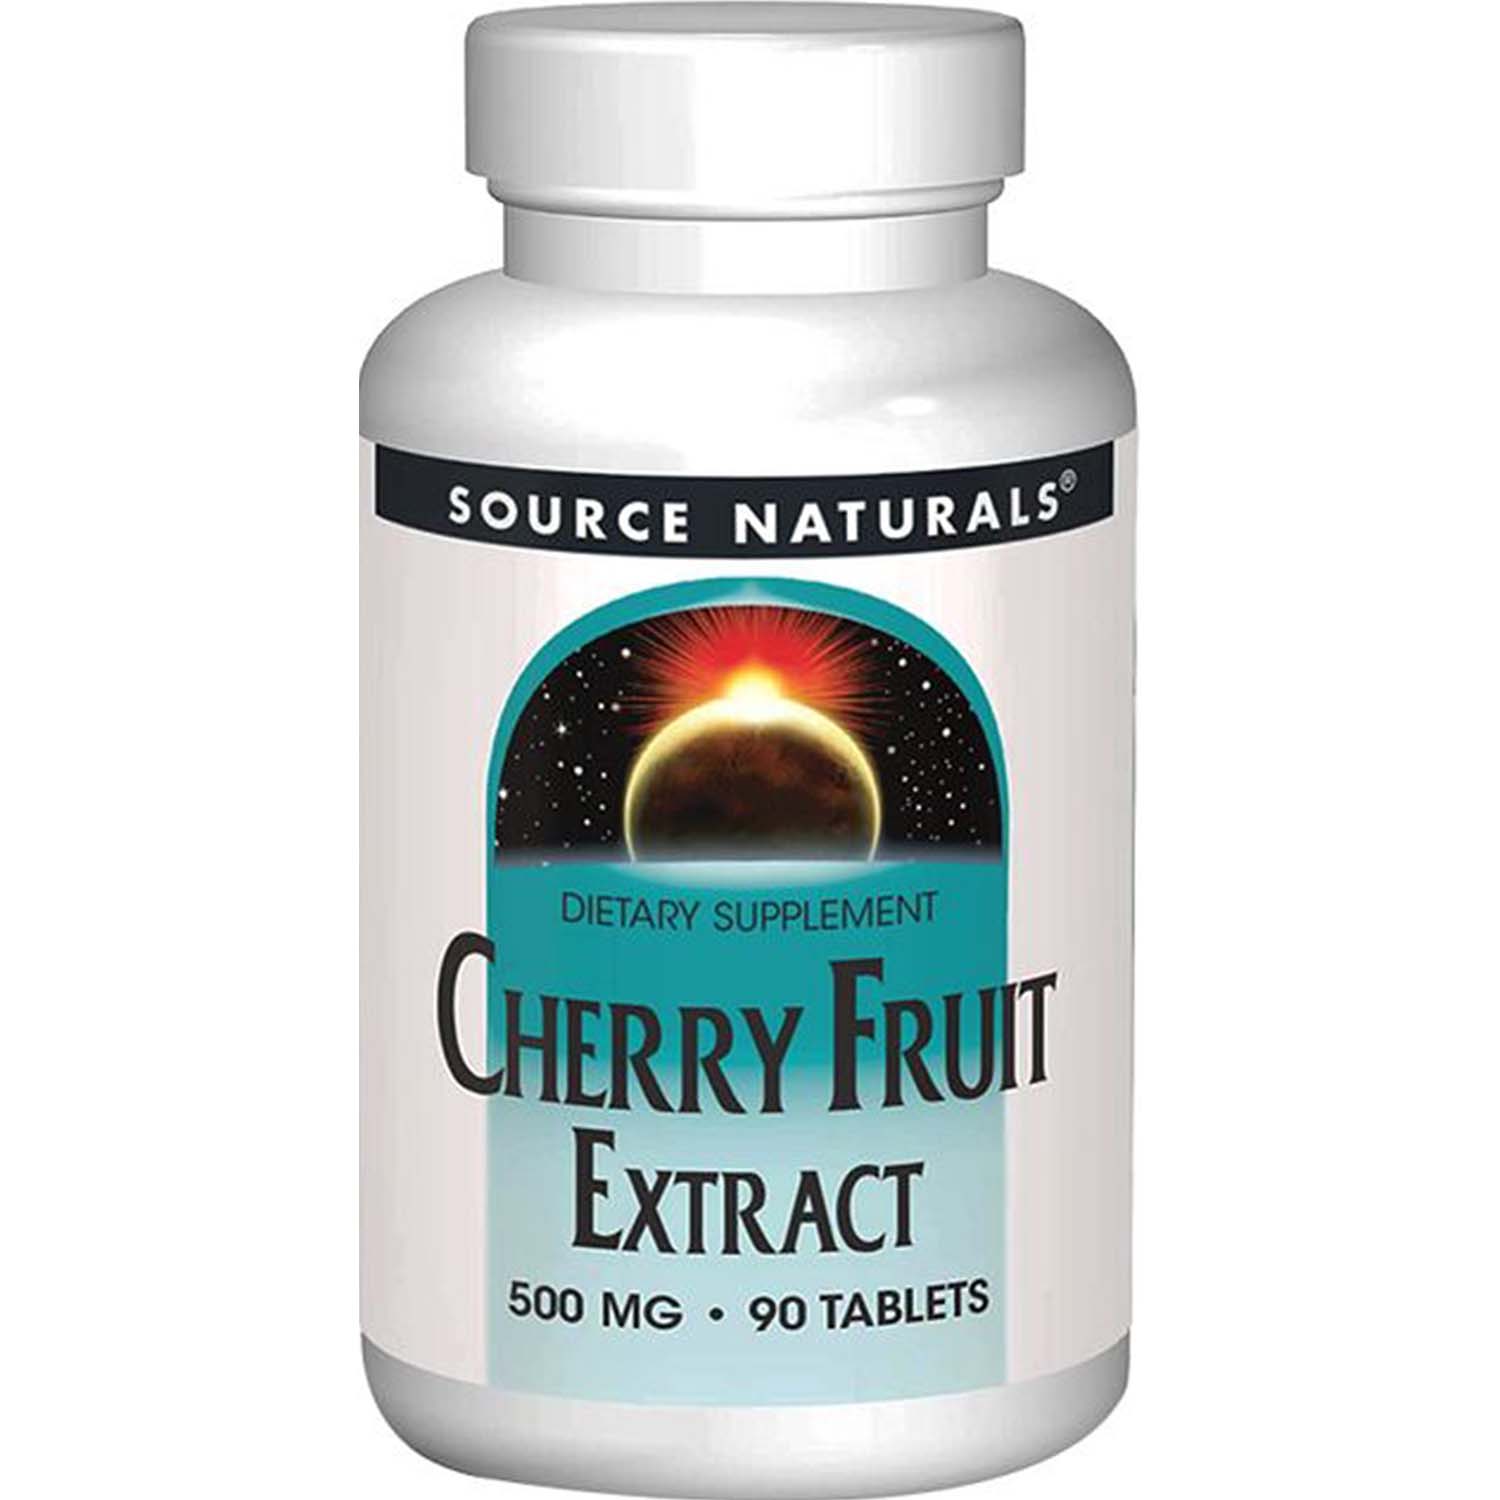 Source Naturals Cherry Fruit Extract, 500 mg, 90 Tablets